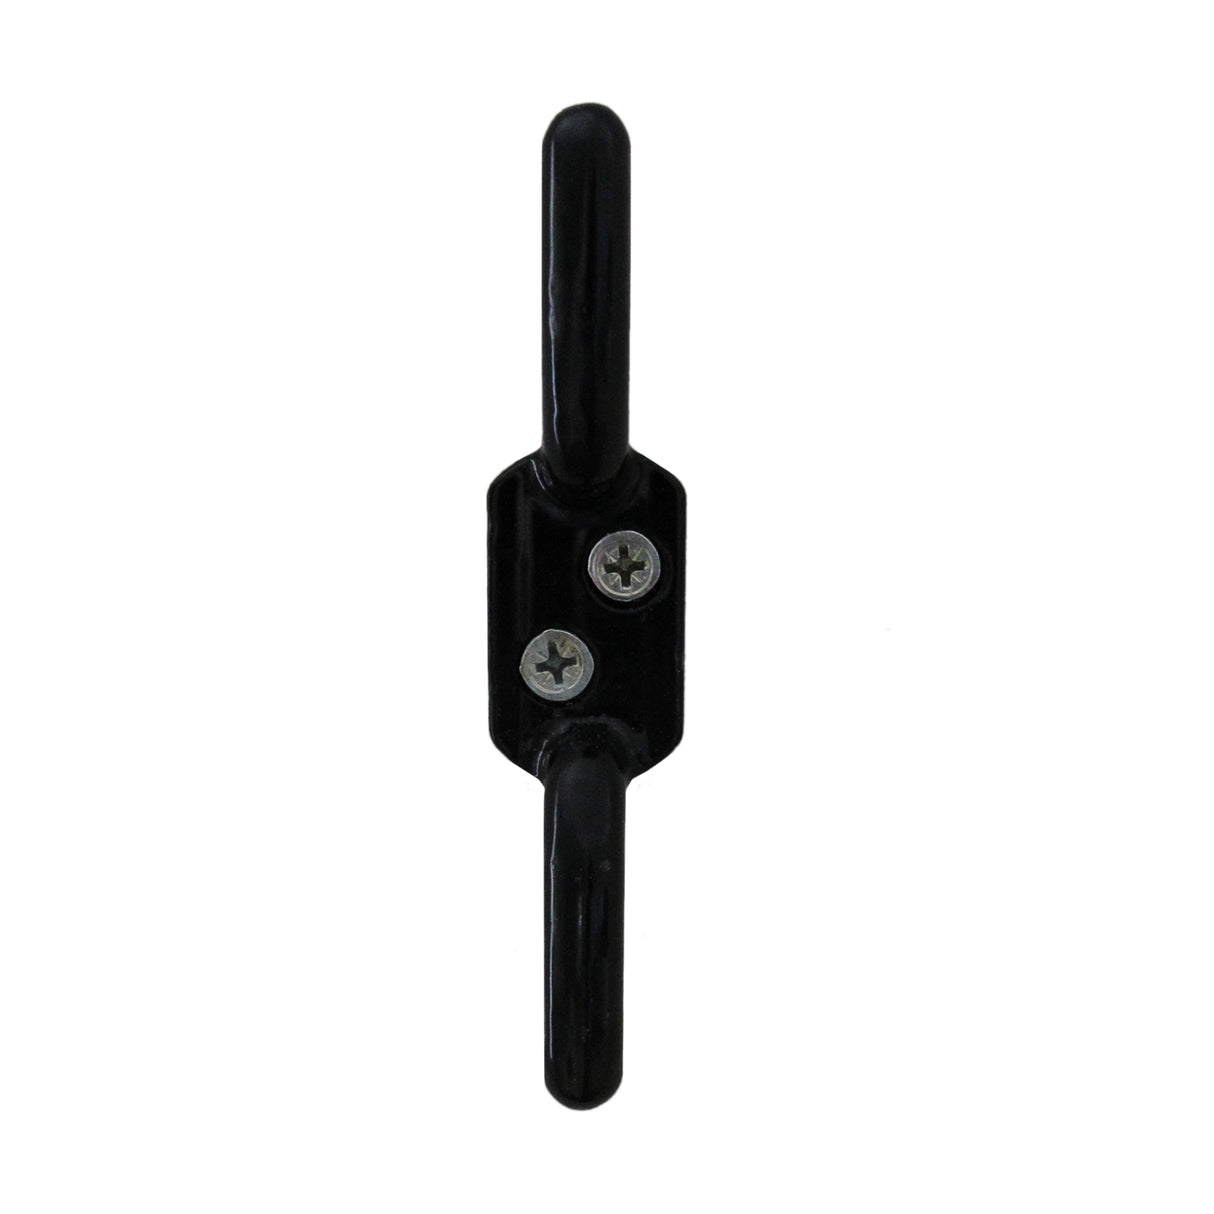 Clothing Airer Ceiling Pulley - Black - 2.4m